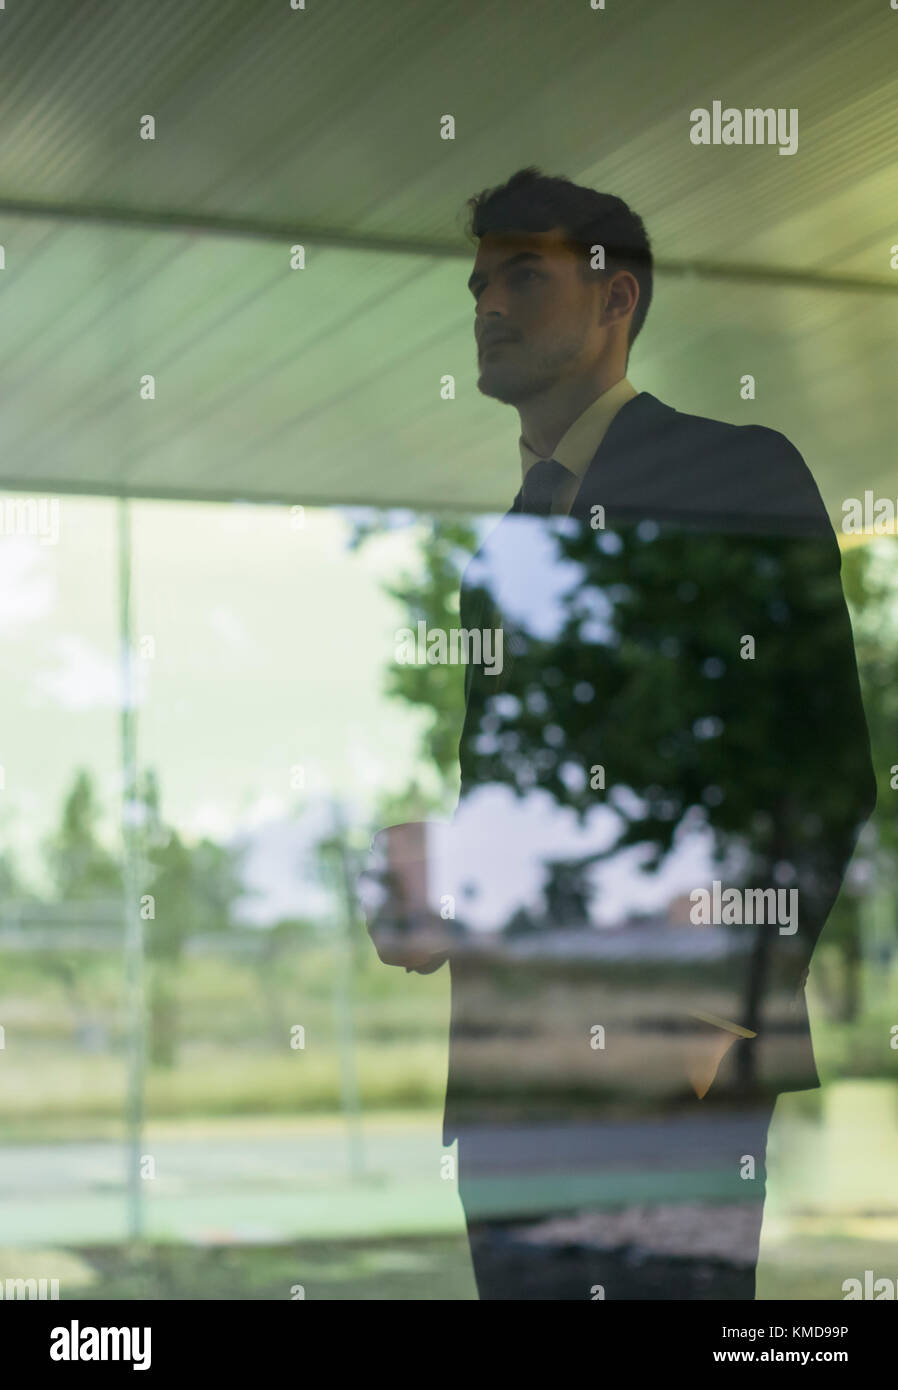 Pensive businessman looking out office window Stock Photo